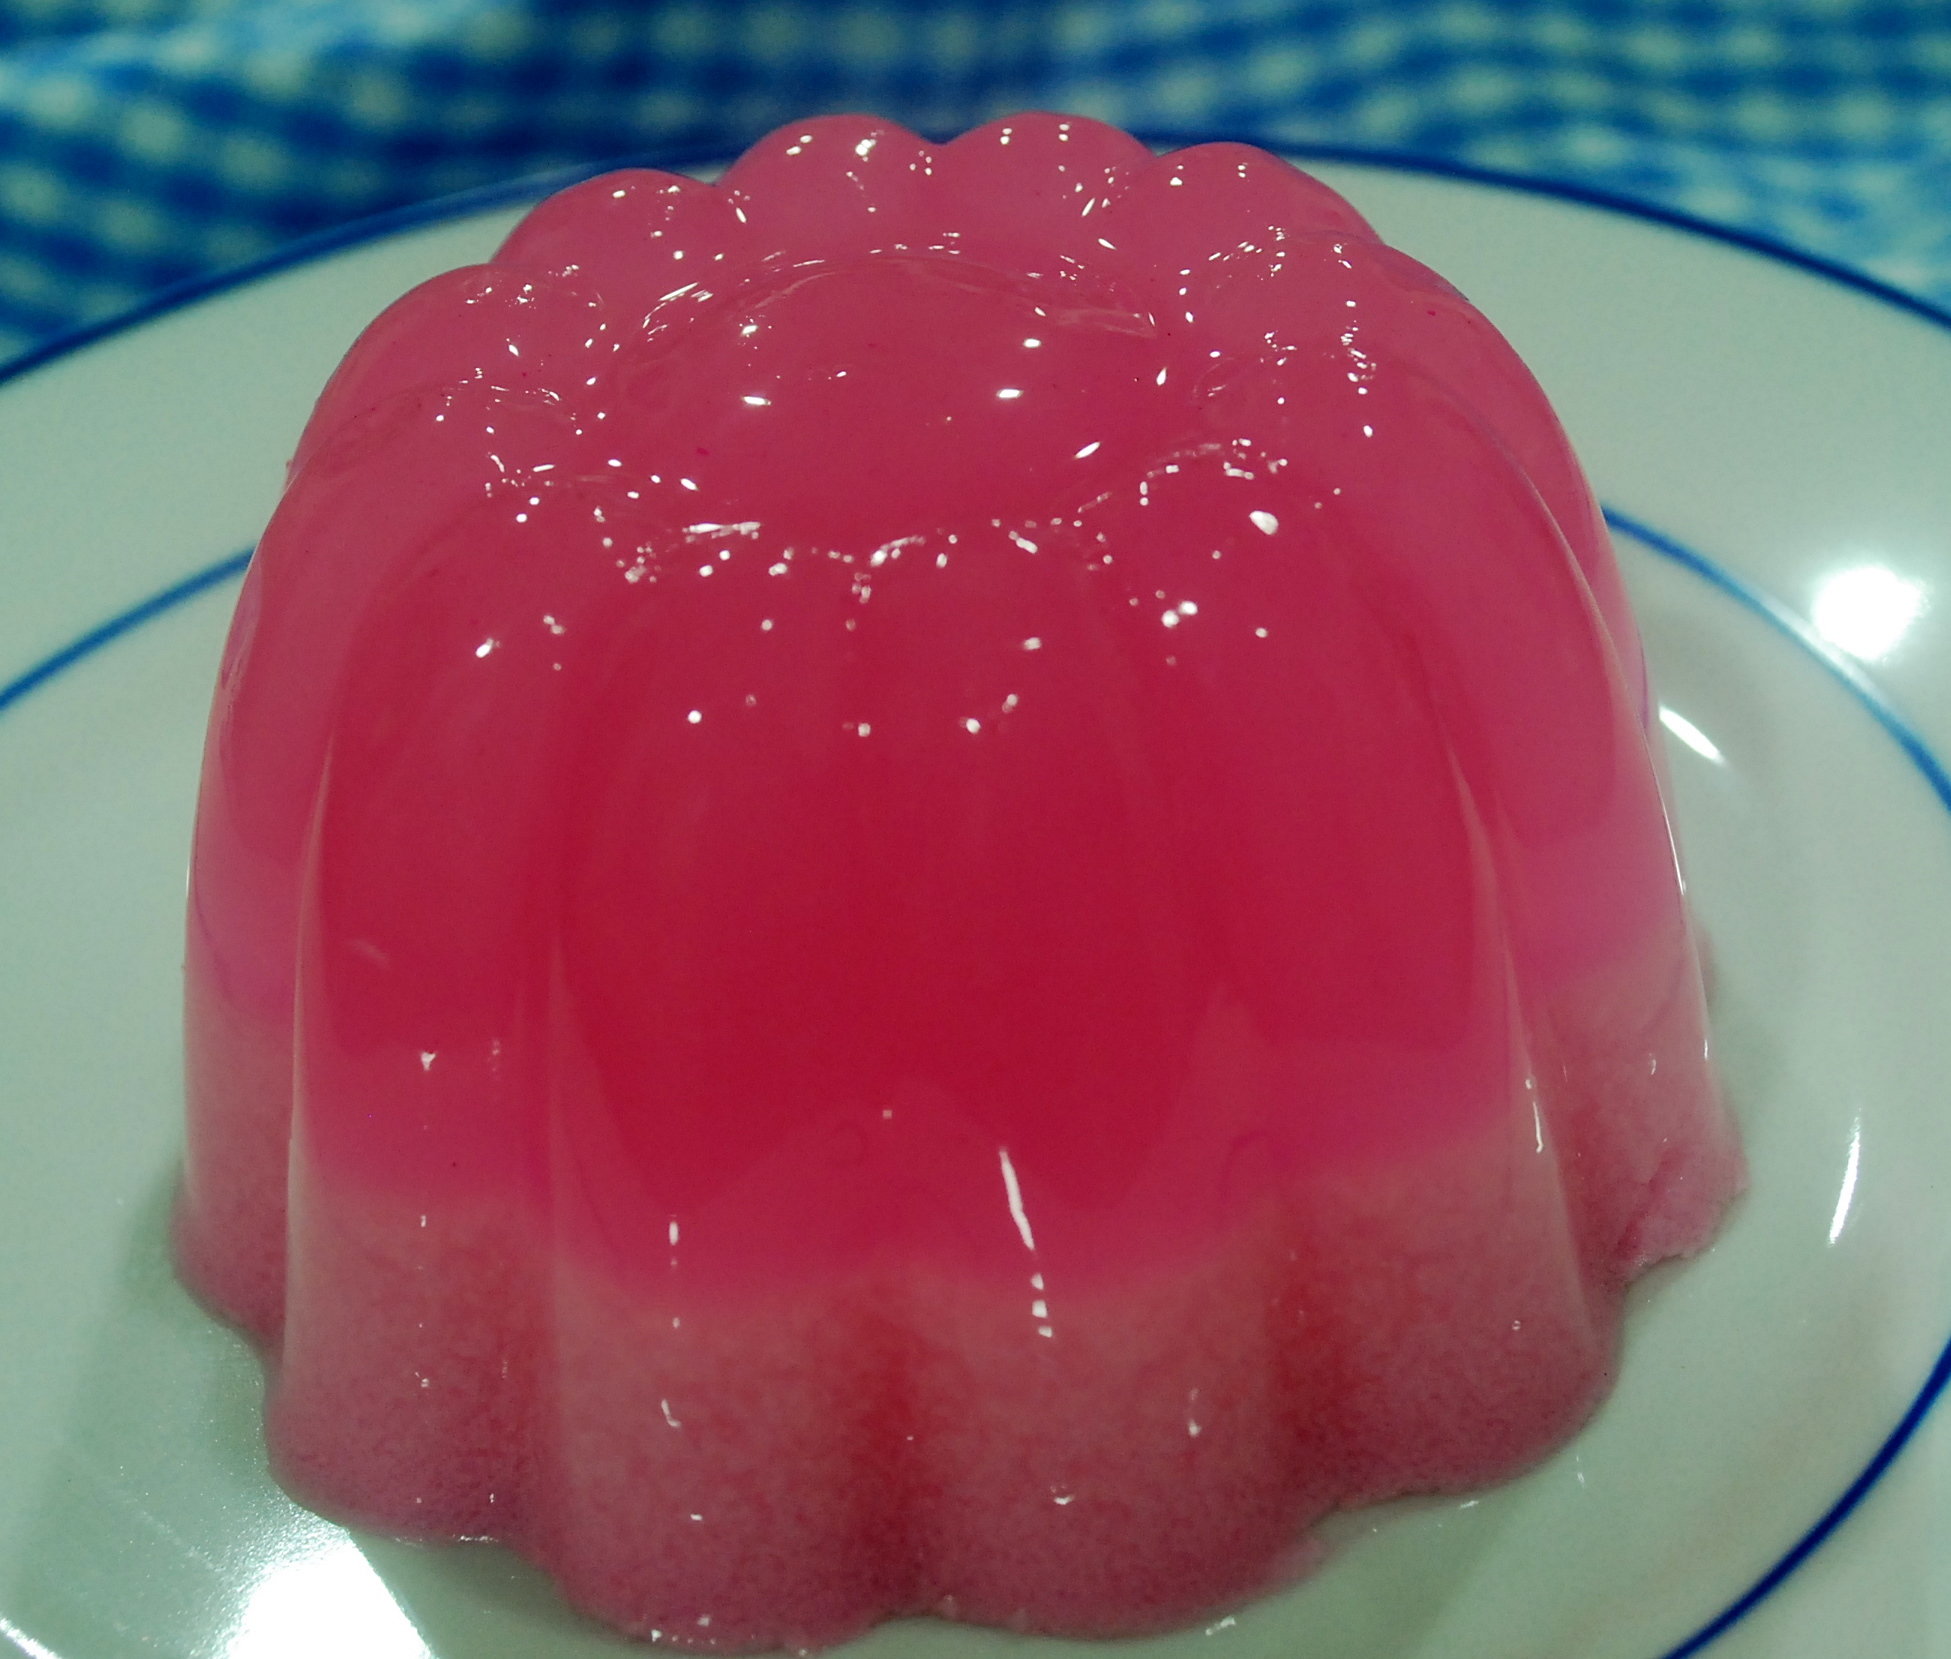 Pink jelly